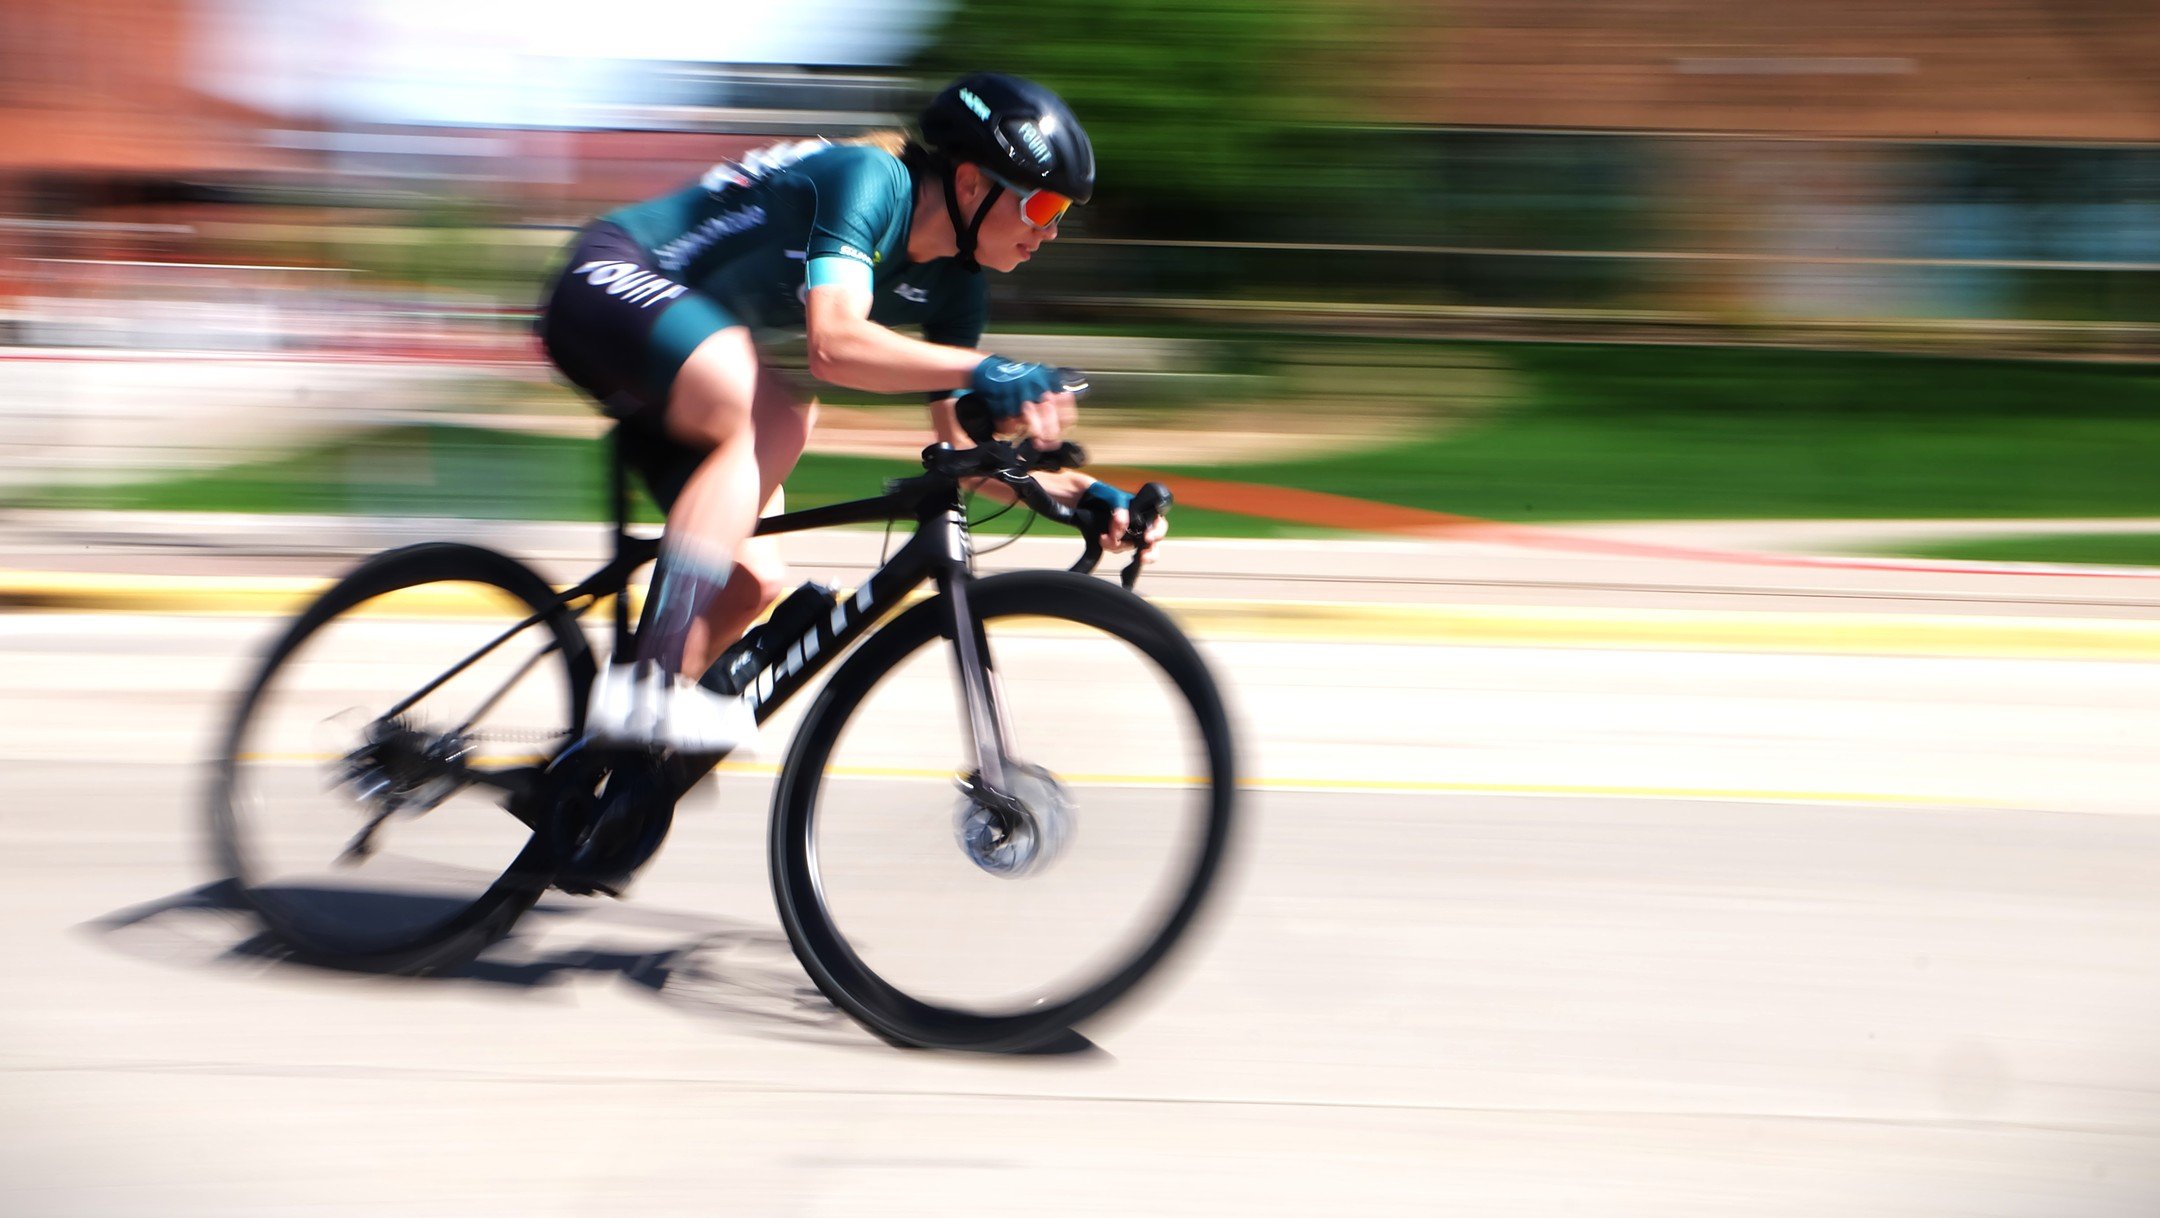 Team B&amp;E (Bree &amp; Eric) of Embark helped support 4 community events this weekend! And we're not even tired yet...

This blurry photoset is from the Sunday Criterium, part of the La Crosse Omnium's three day road bike race series produced by @o